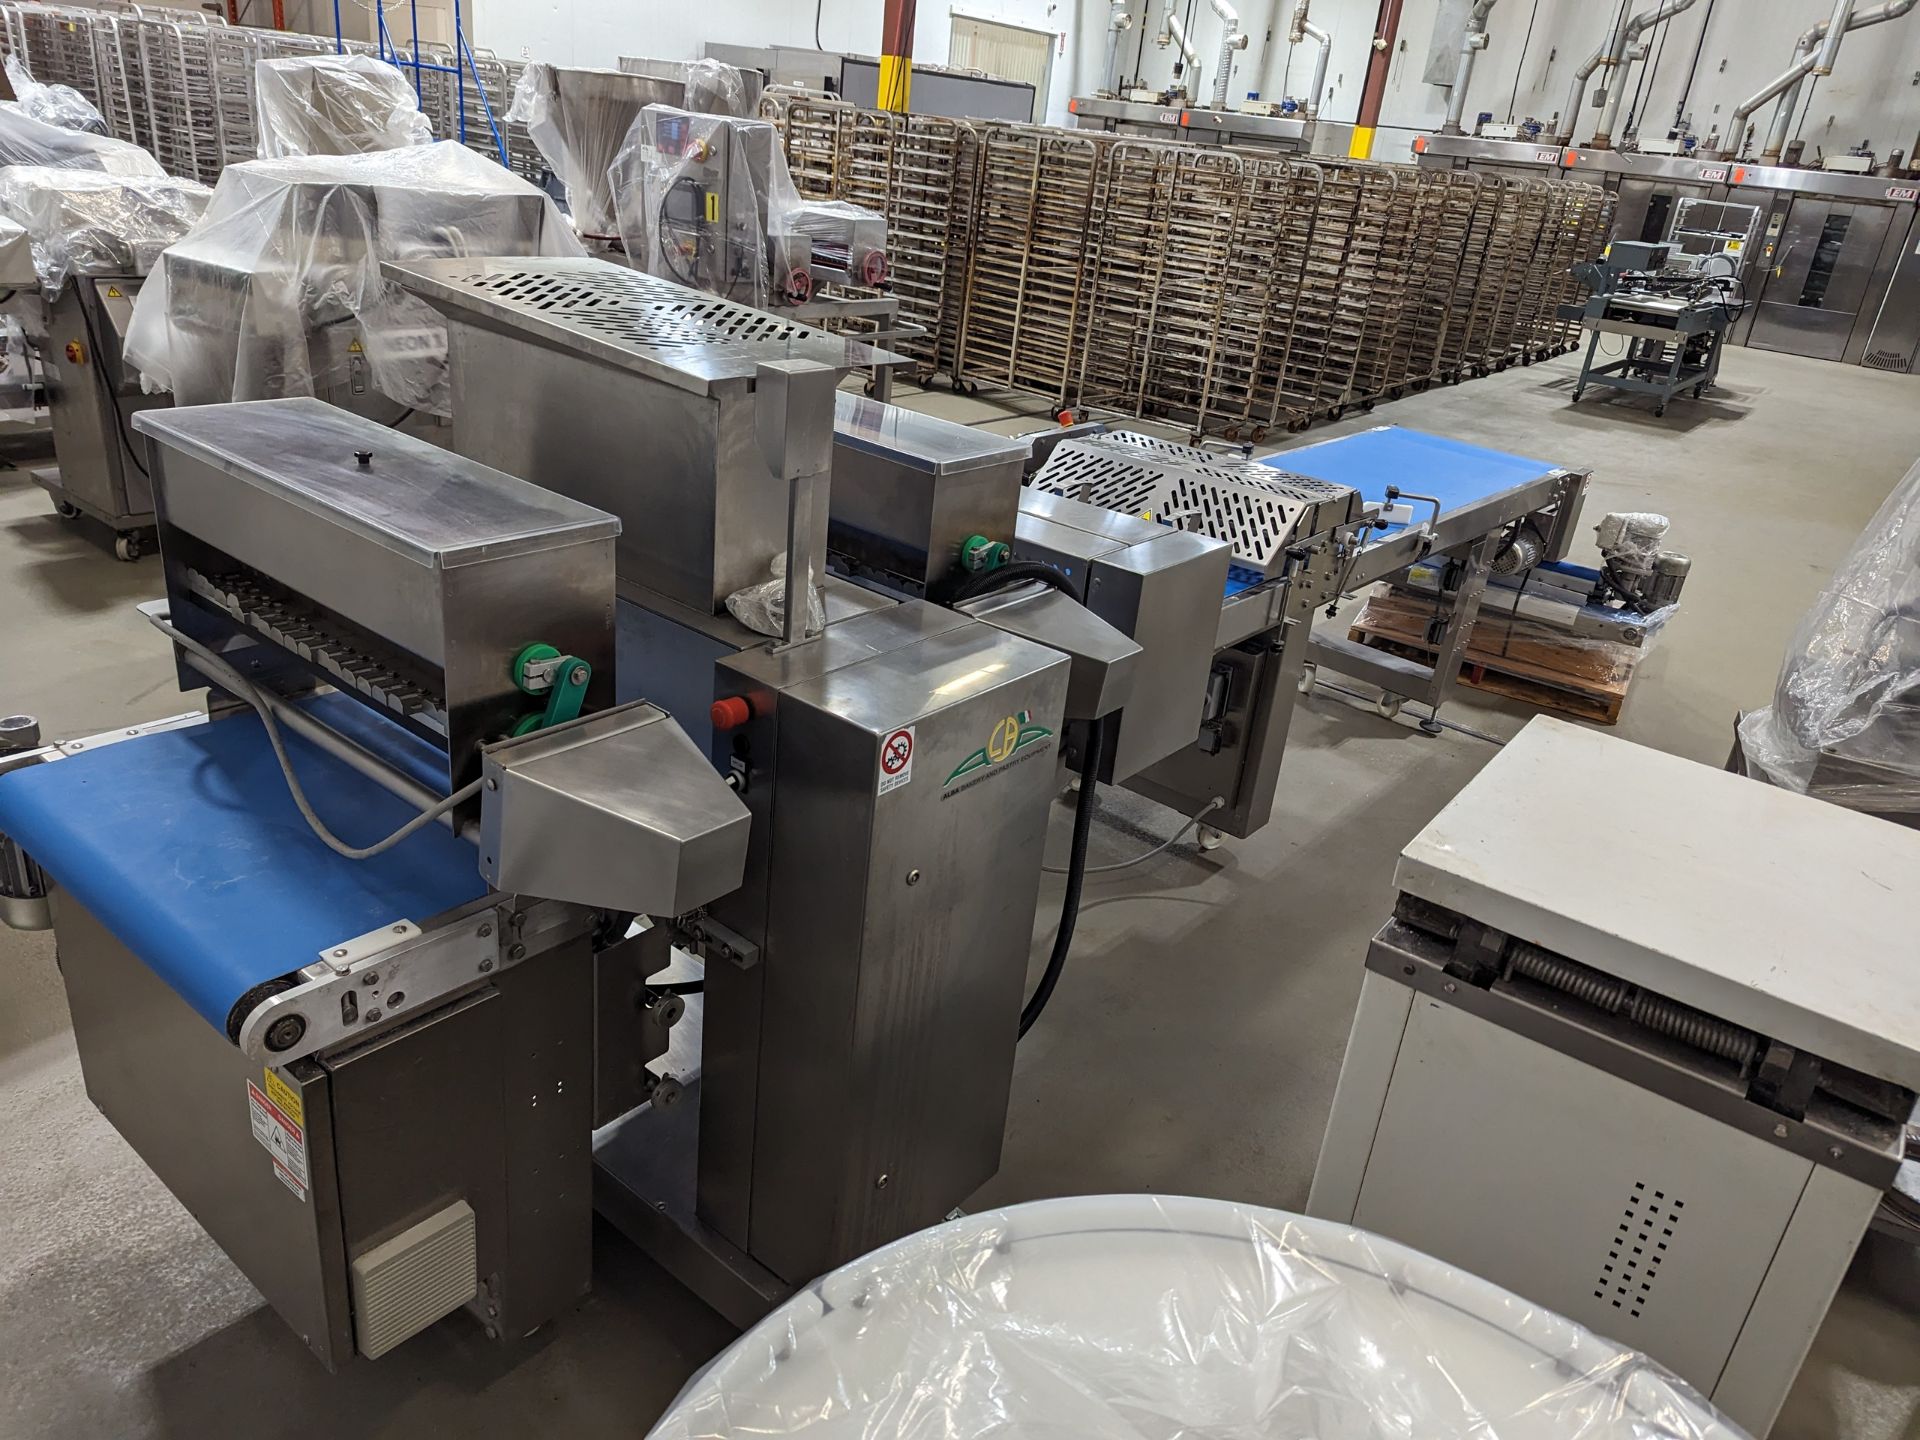 Alba 734940LIN Pastry Line, Dimensions LxWxH: 204x52x60 - Image 3 of 6